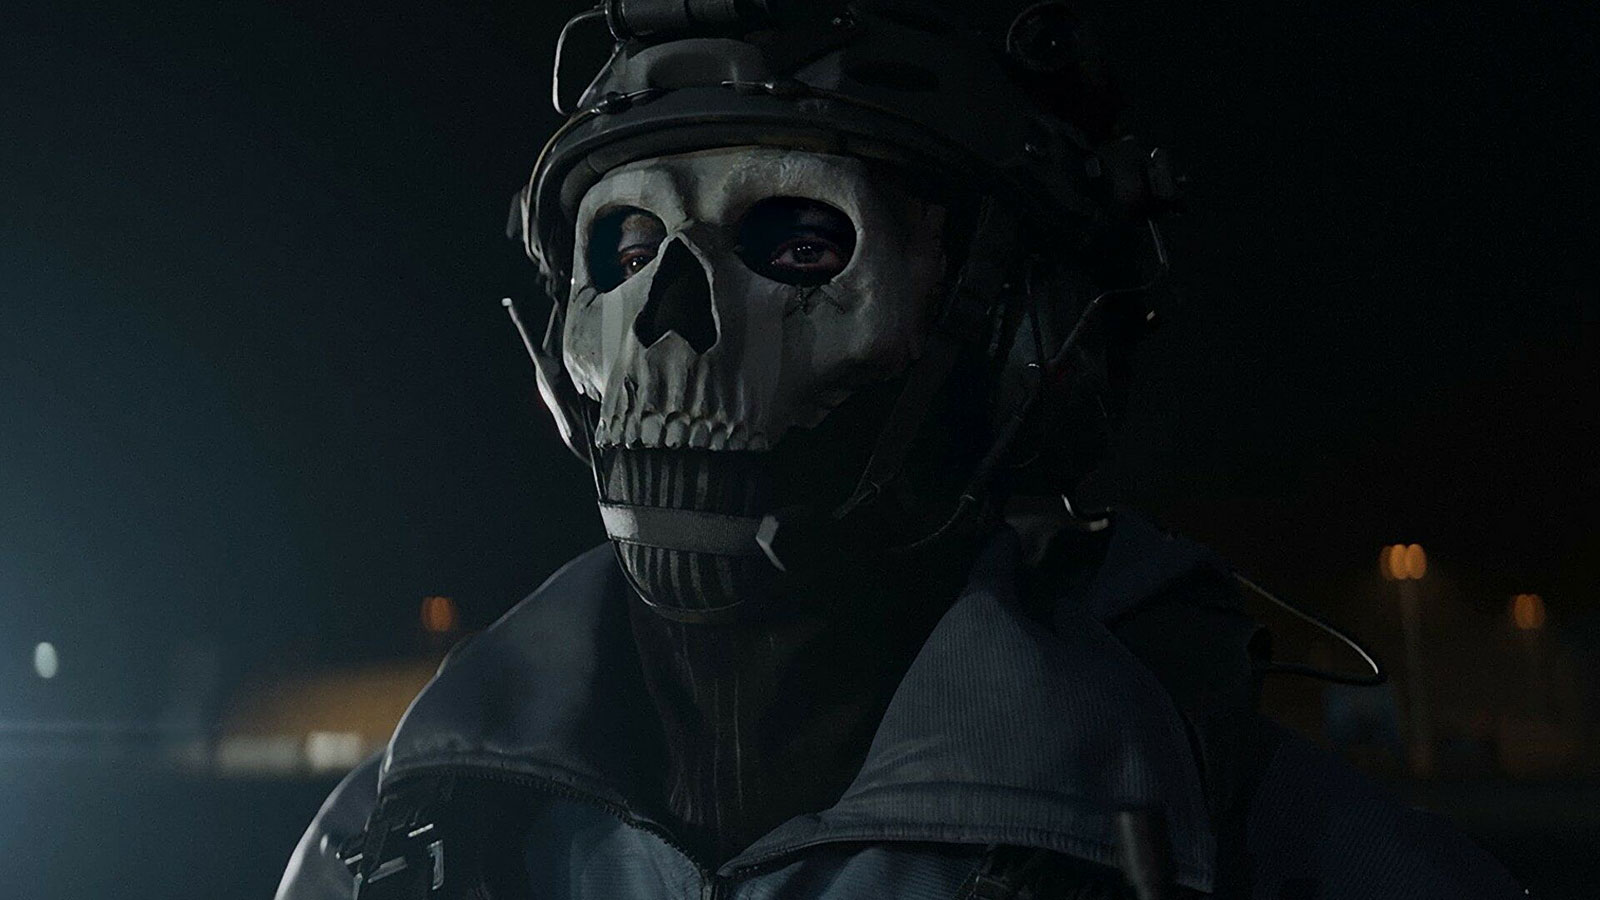 What does Ghost look like under his mask?